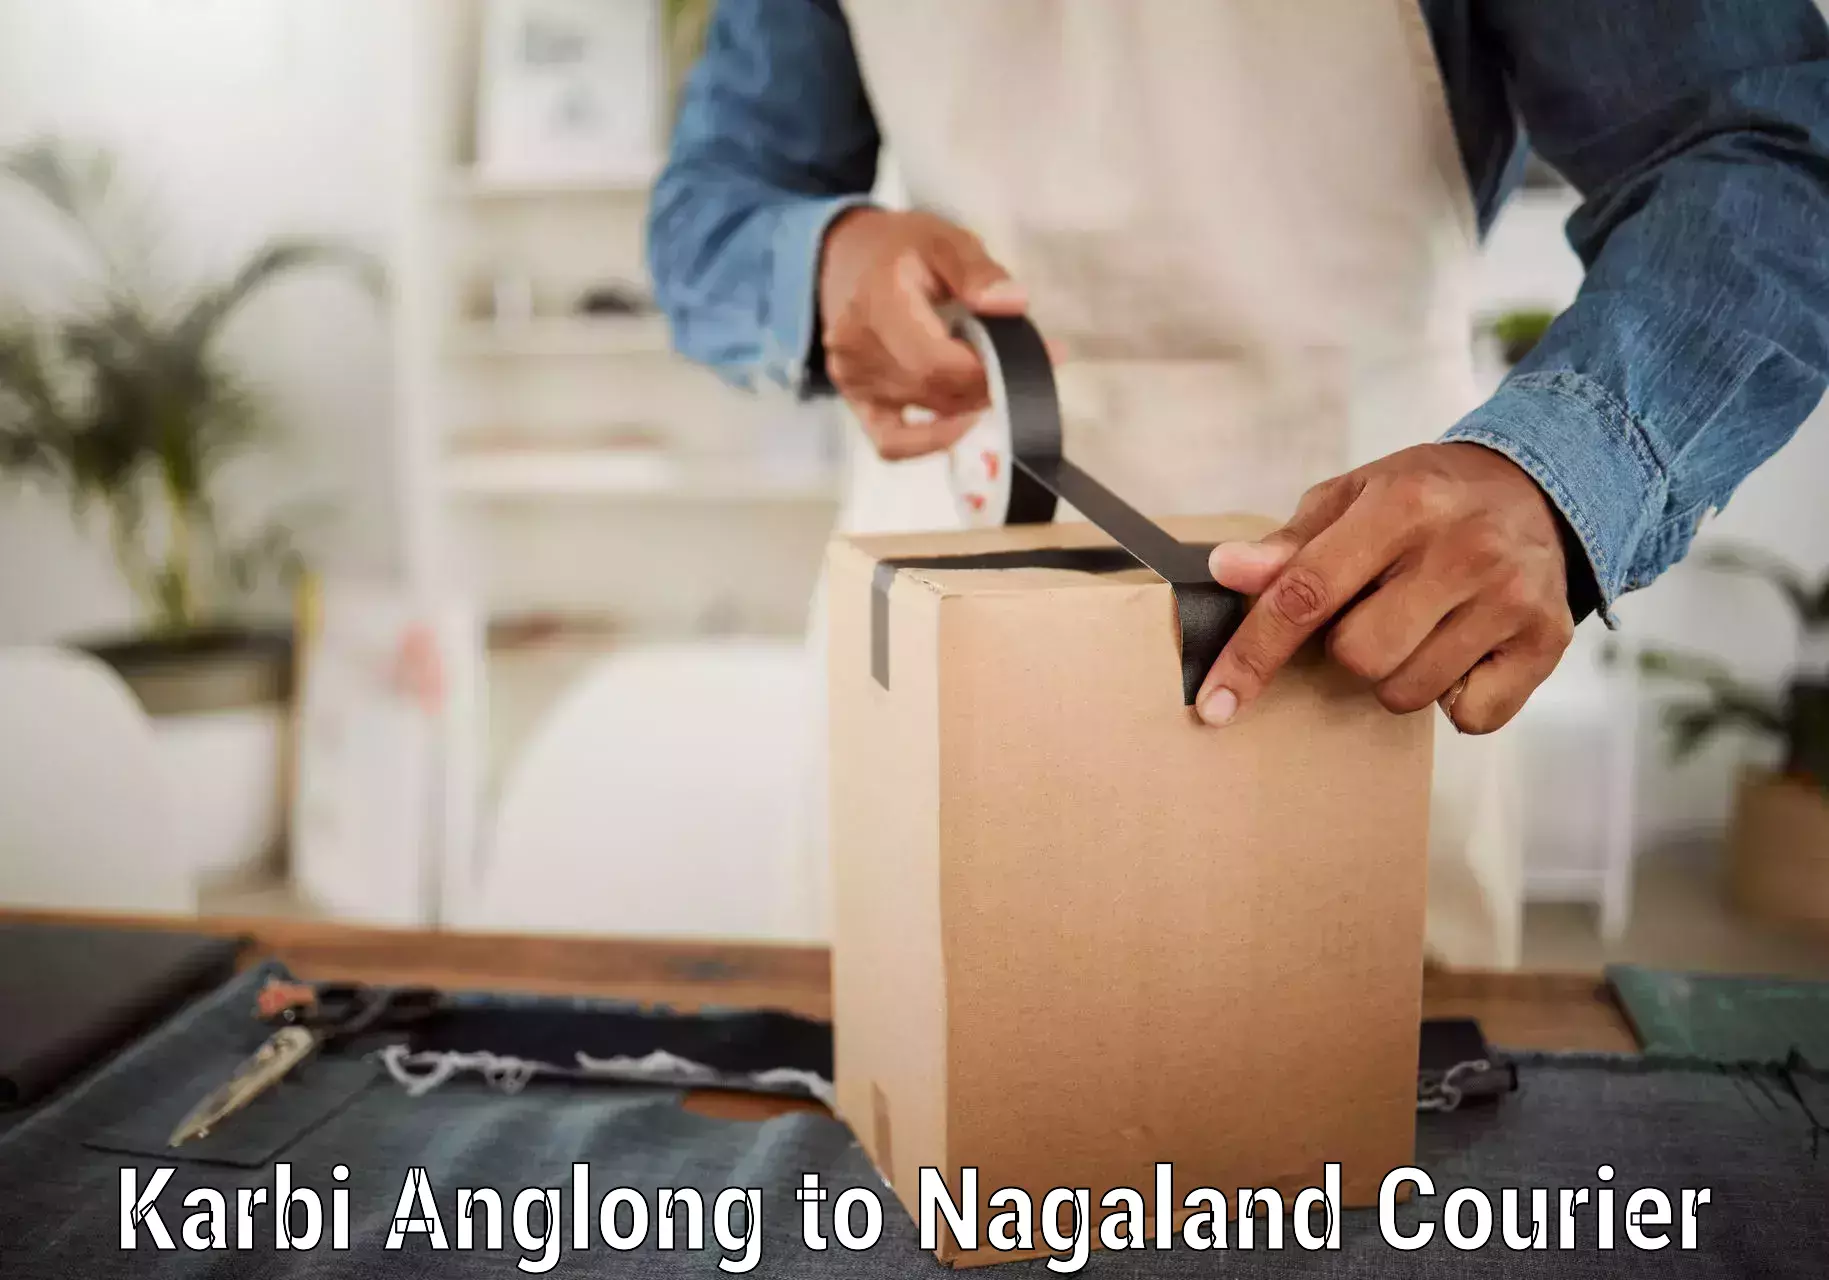 Reliable delivery network Karbi Anglong to Dimapur